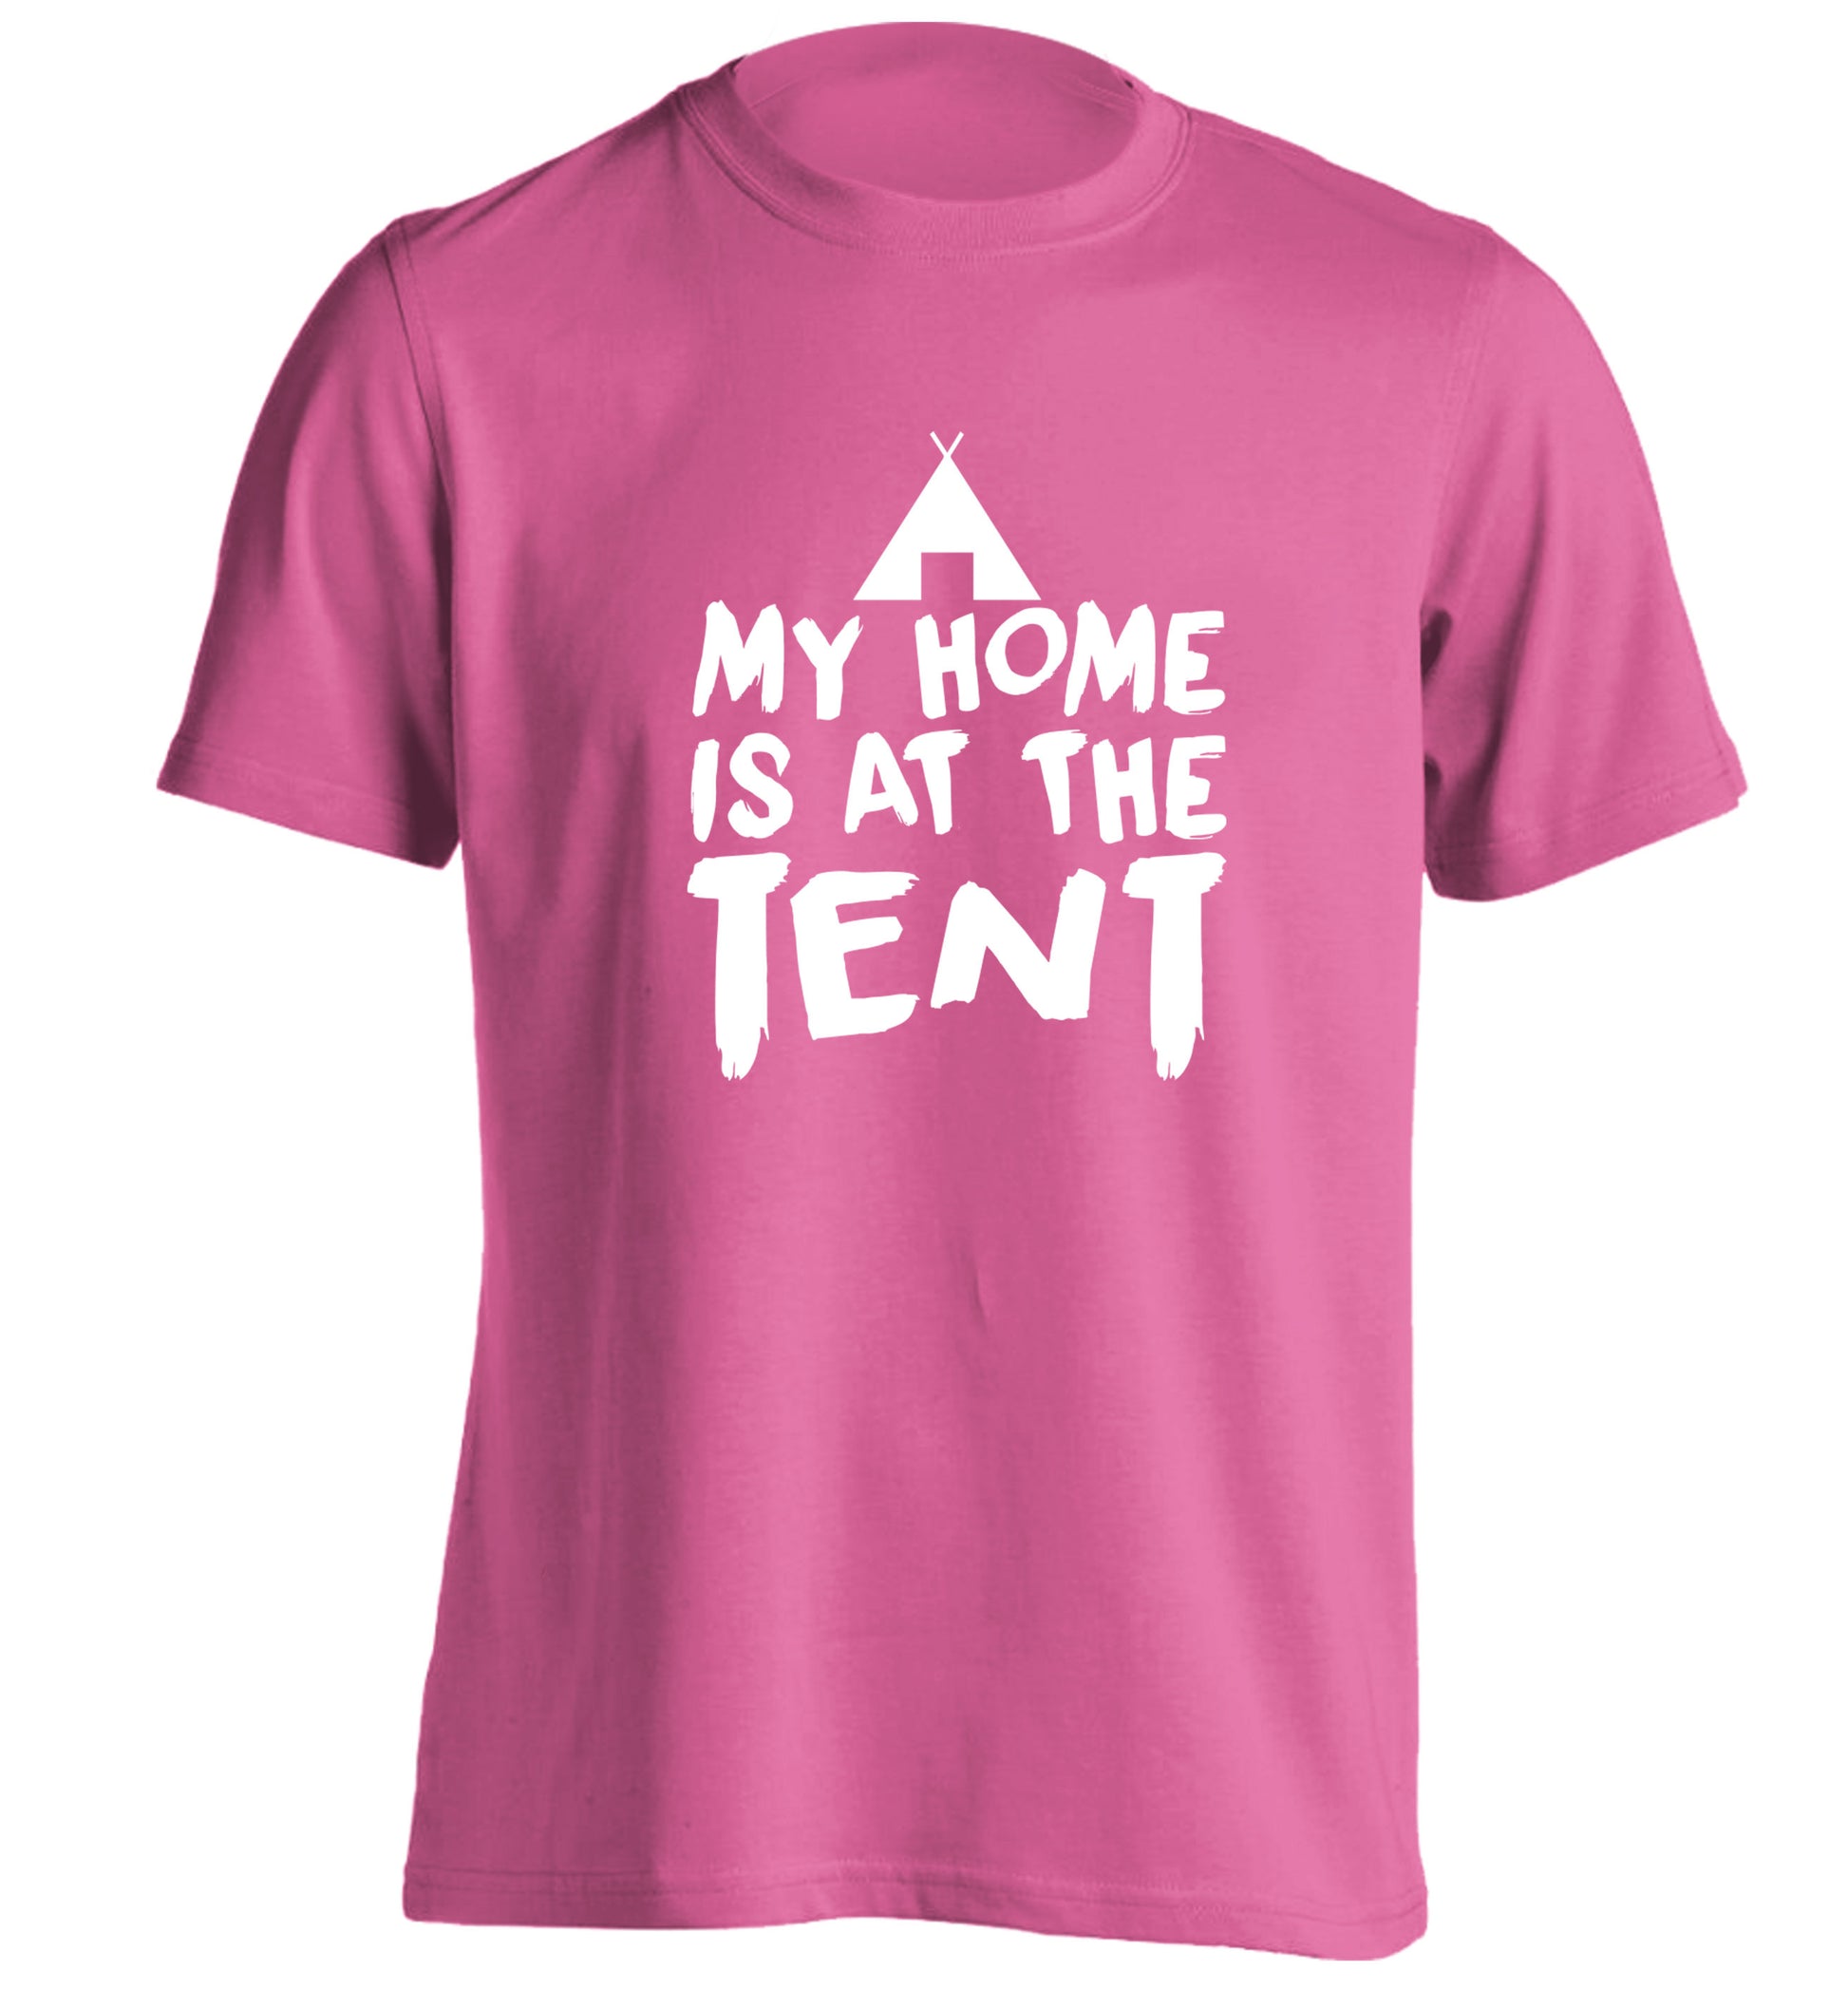 My home is at the tent adults unisex pink Tshirt 2XL